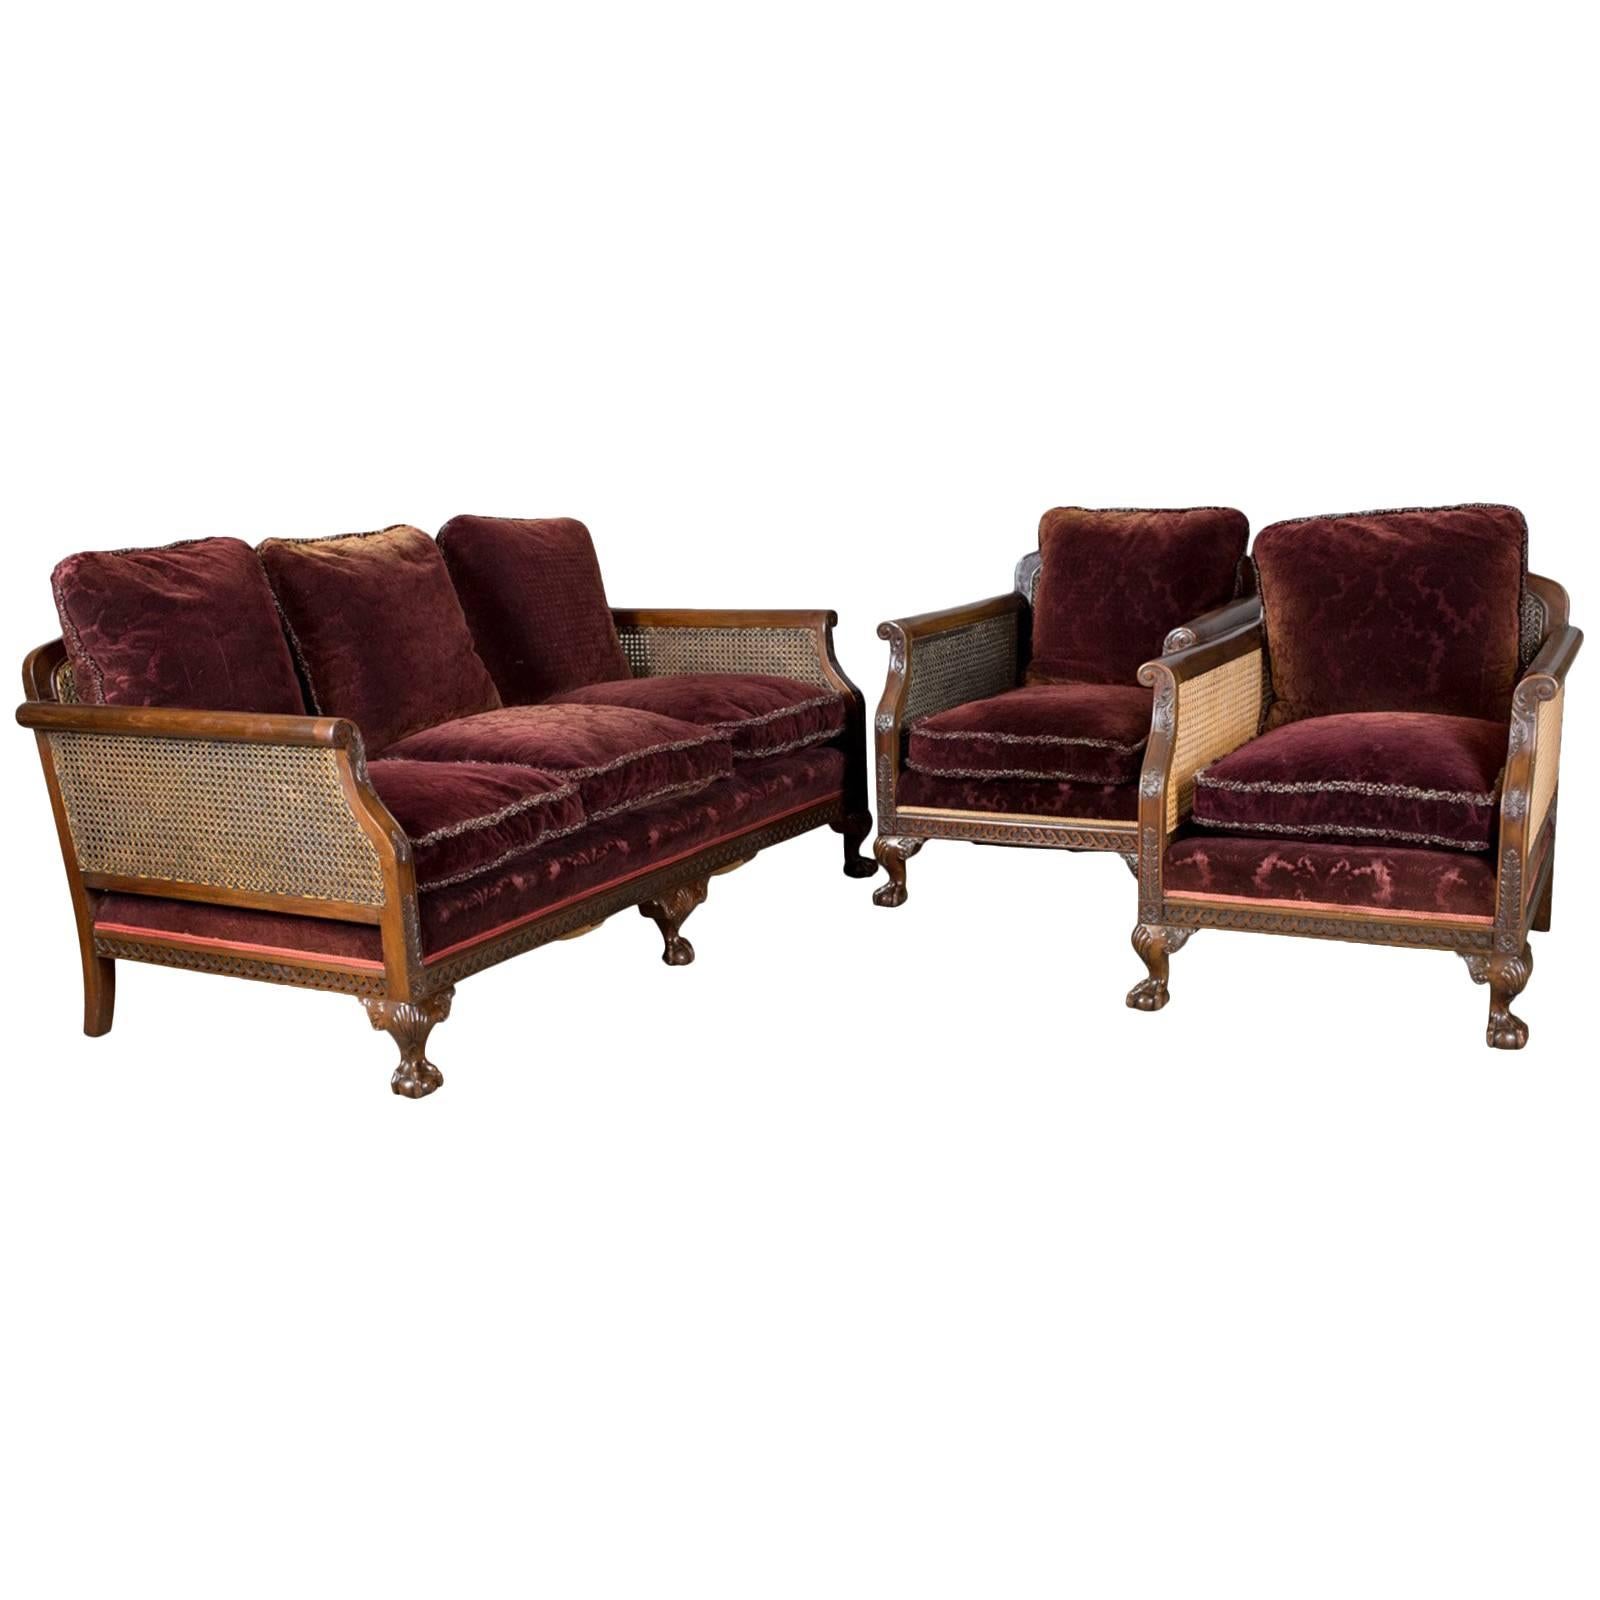 Antique Conservatory Suite, Bergère Sofa and Two Chairs, Edwardian, English